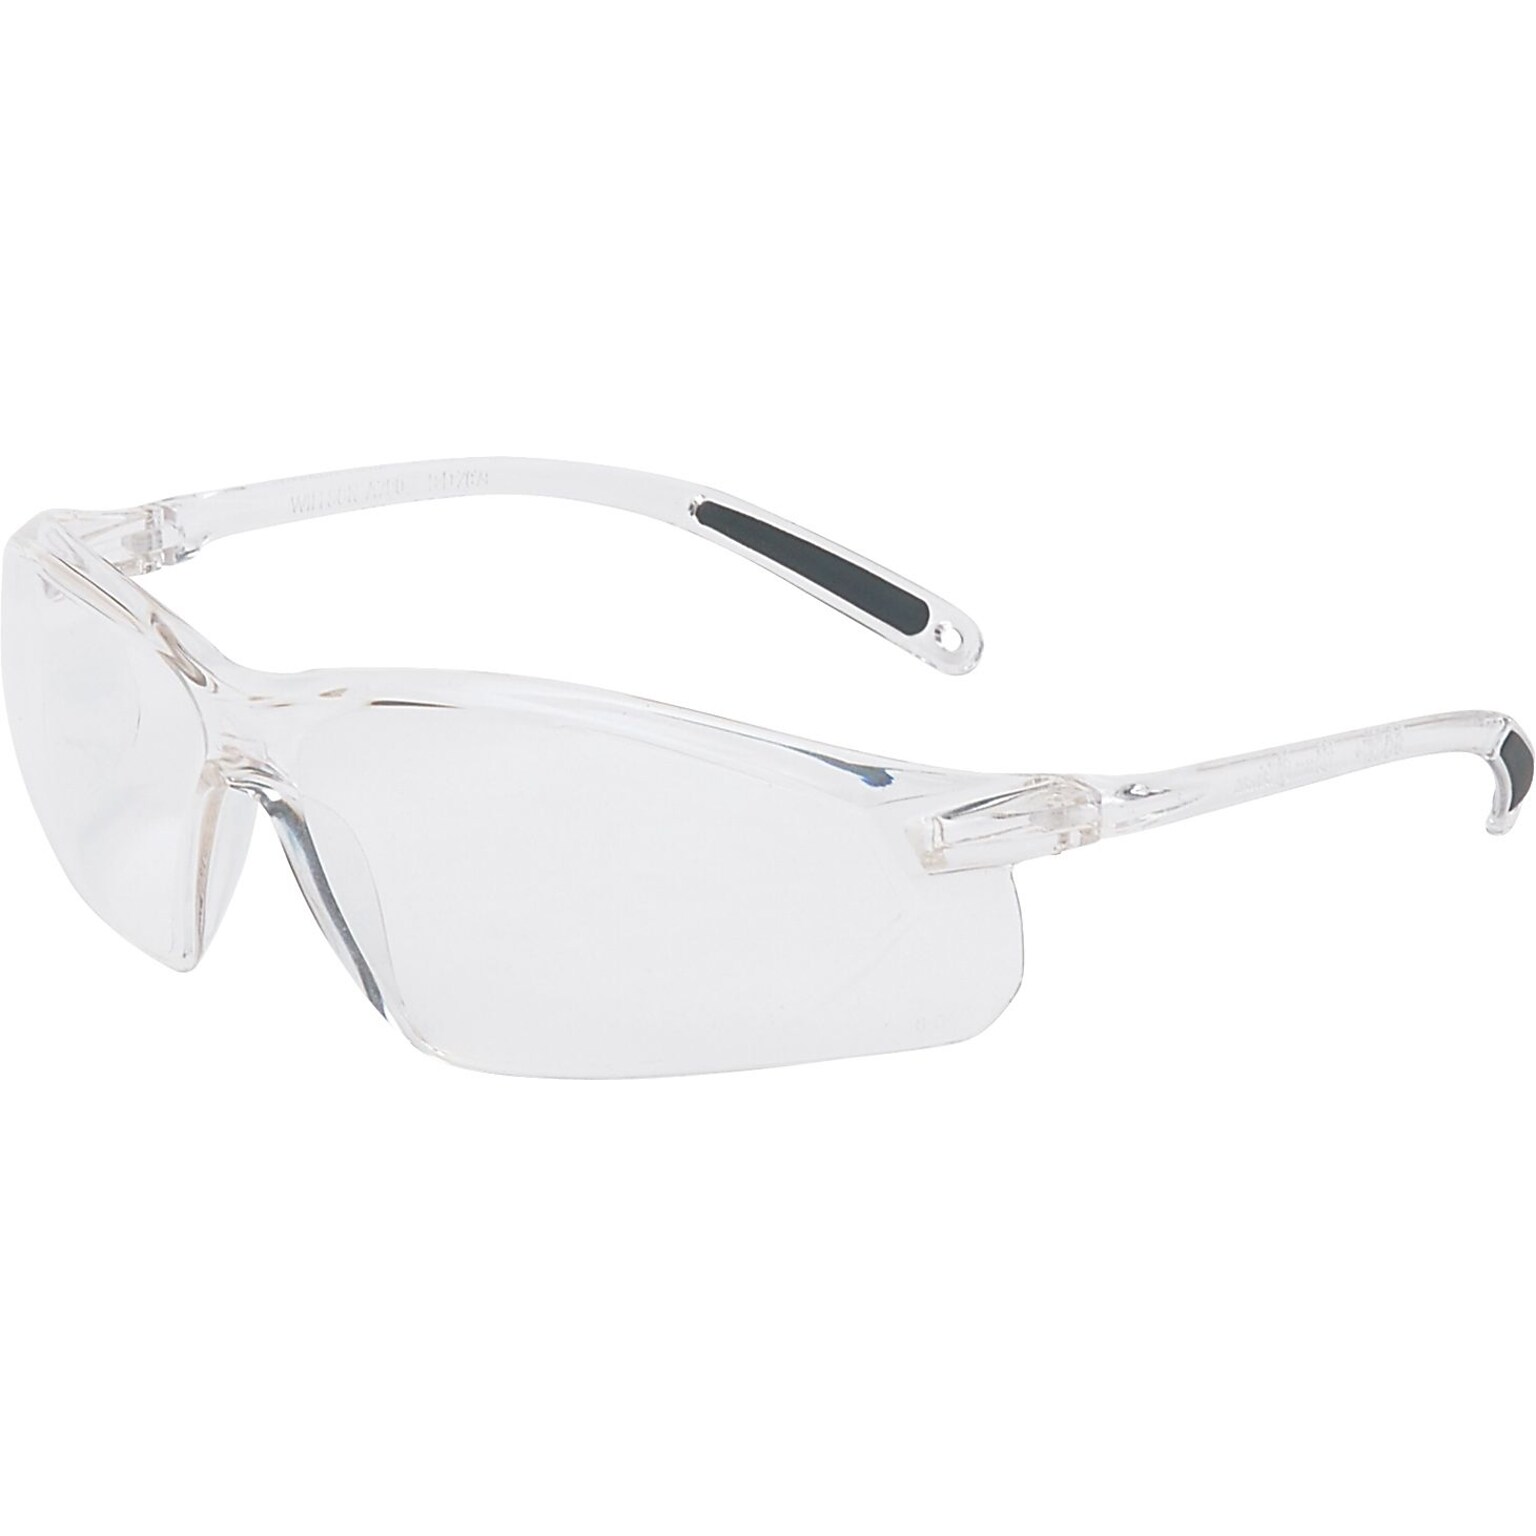 North® A700 Series Safety Glasses, Clear, Antifog Lens